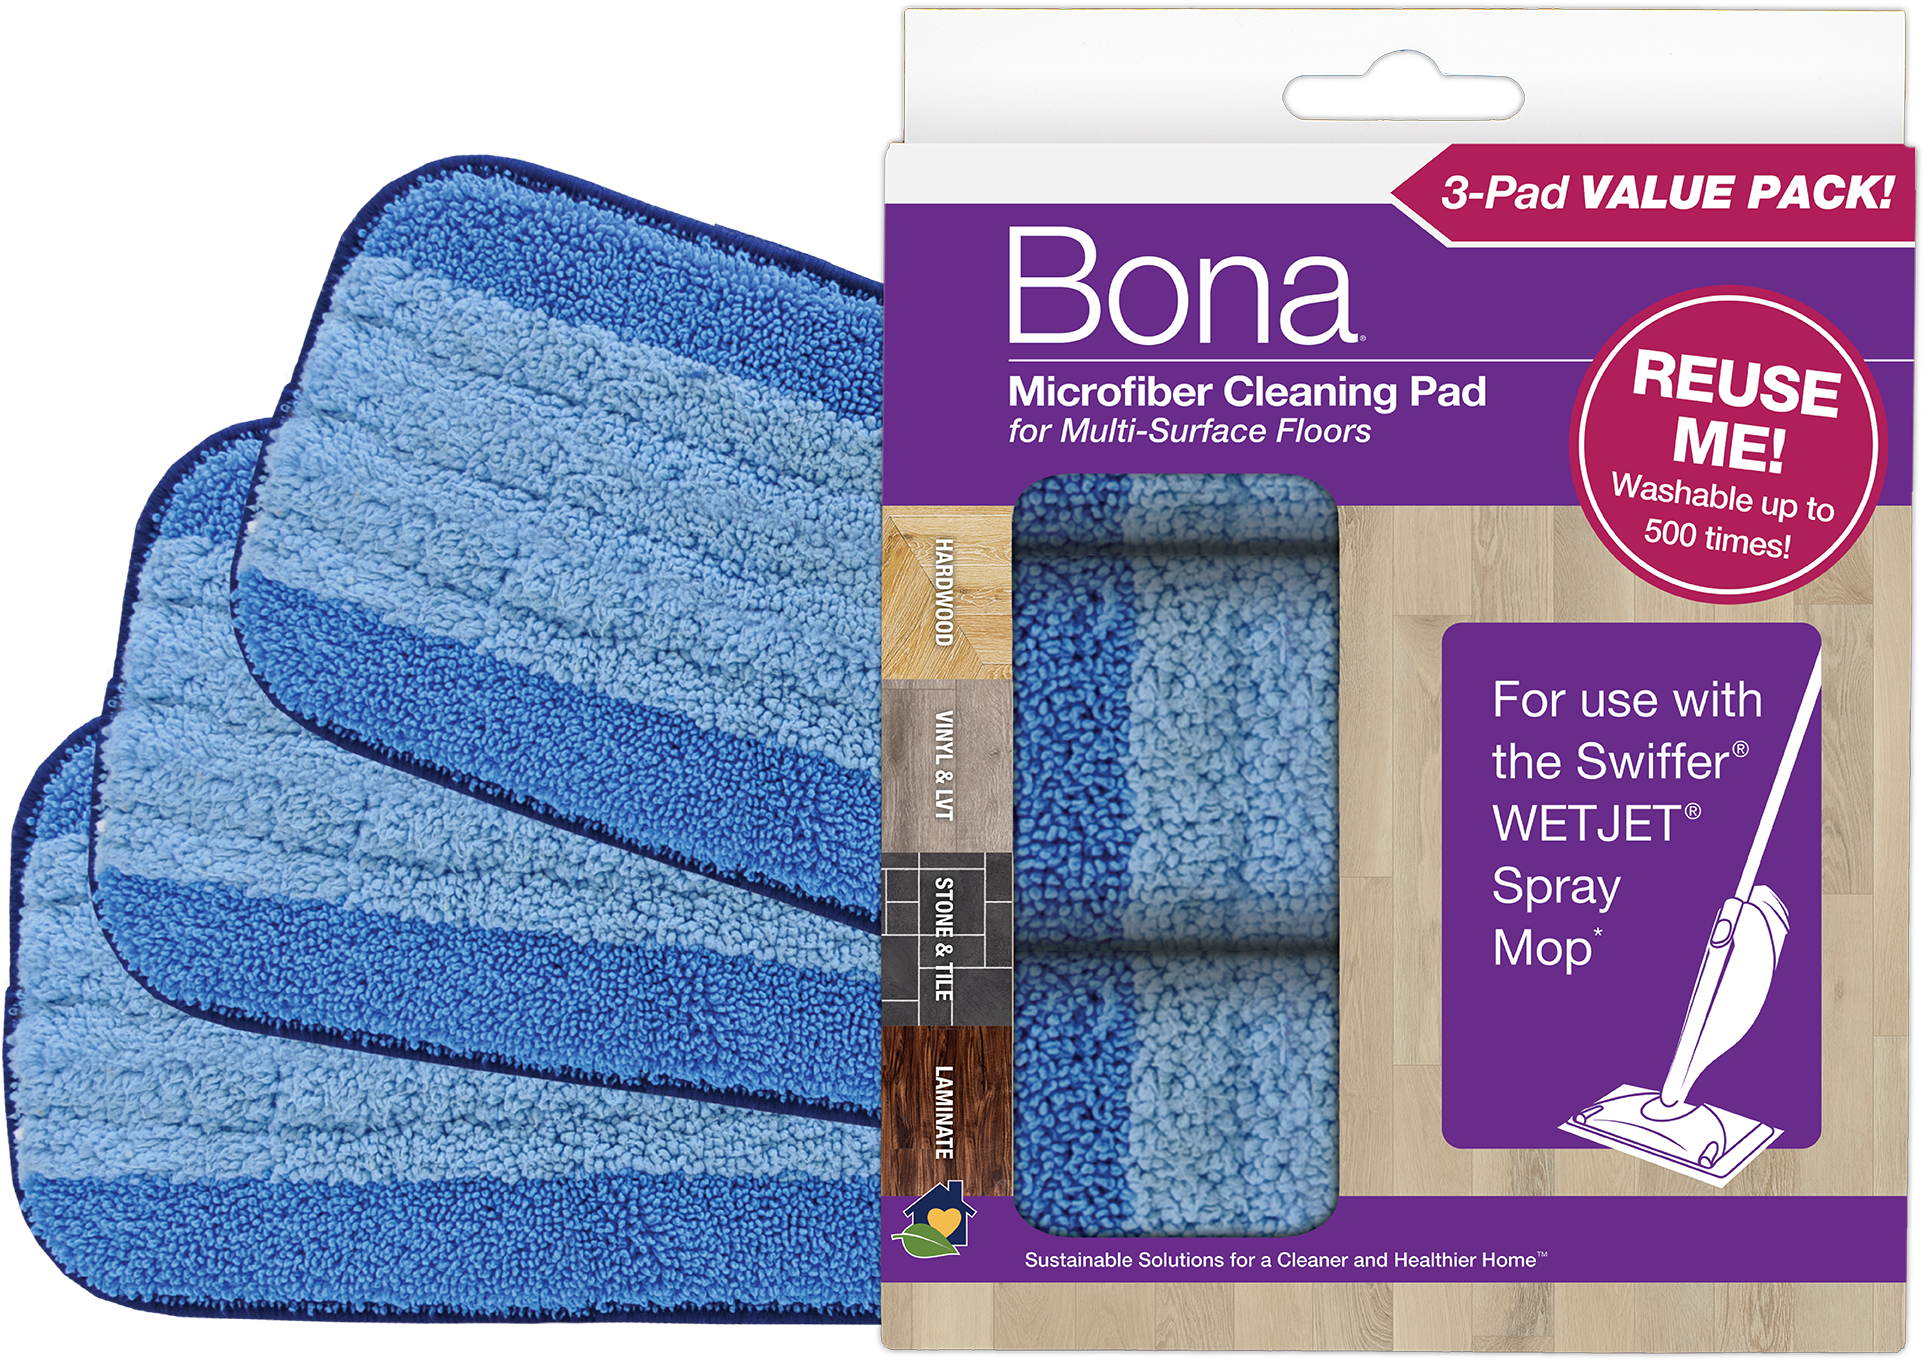 Bona Microfiber Cleaning Pads for use with Swiffer® WETJET® Spray